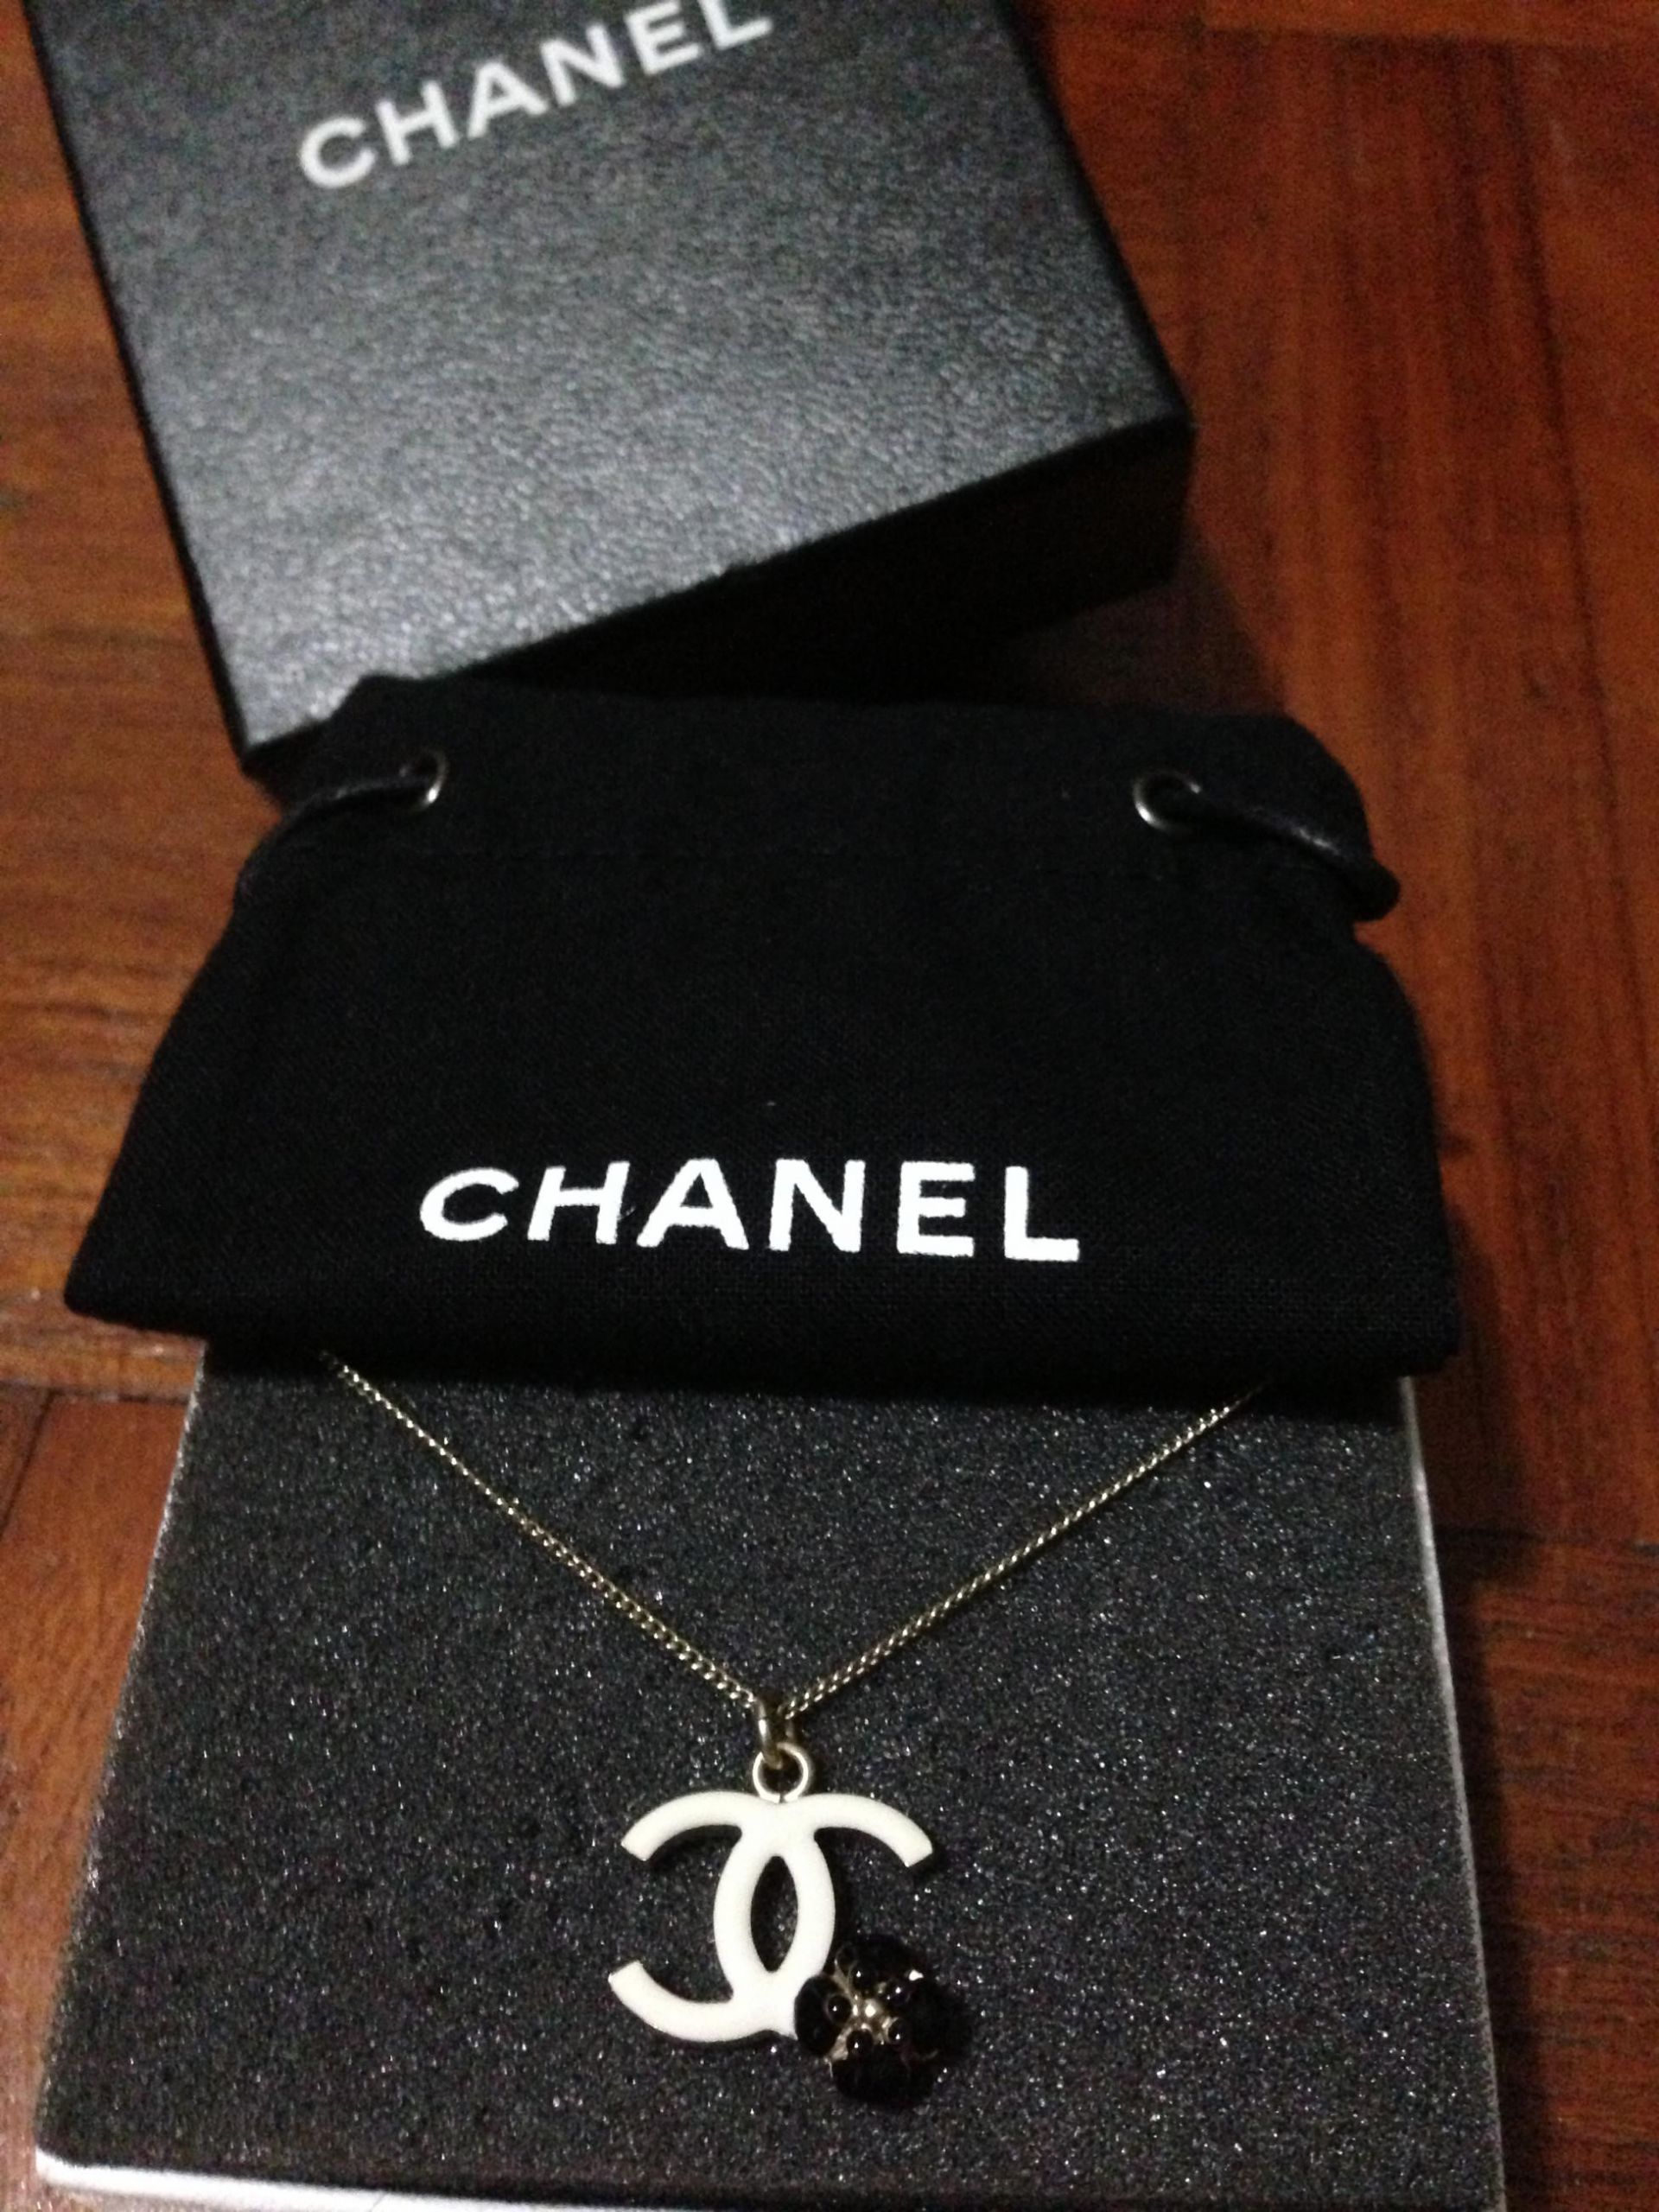 Chanel Necklace Price
 BEST PRICE $250 CHANEL NECKLACE